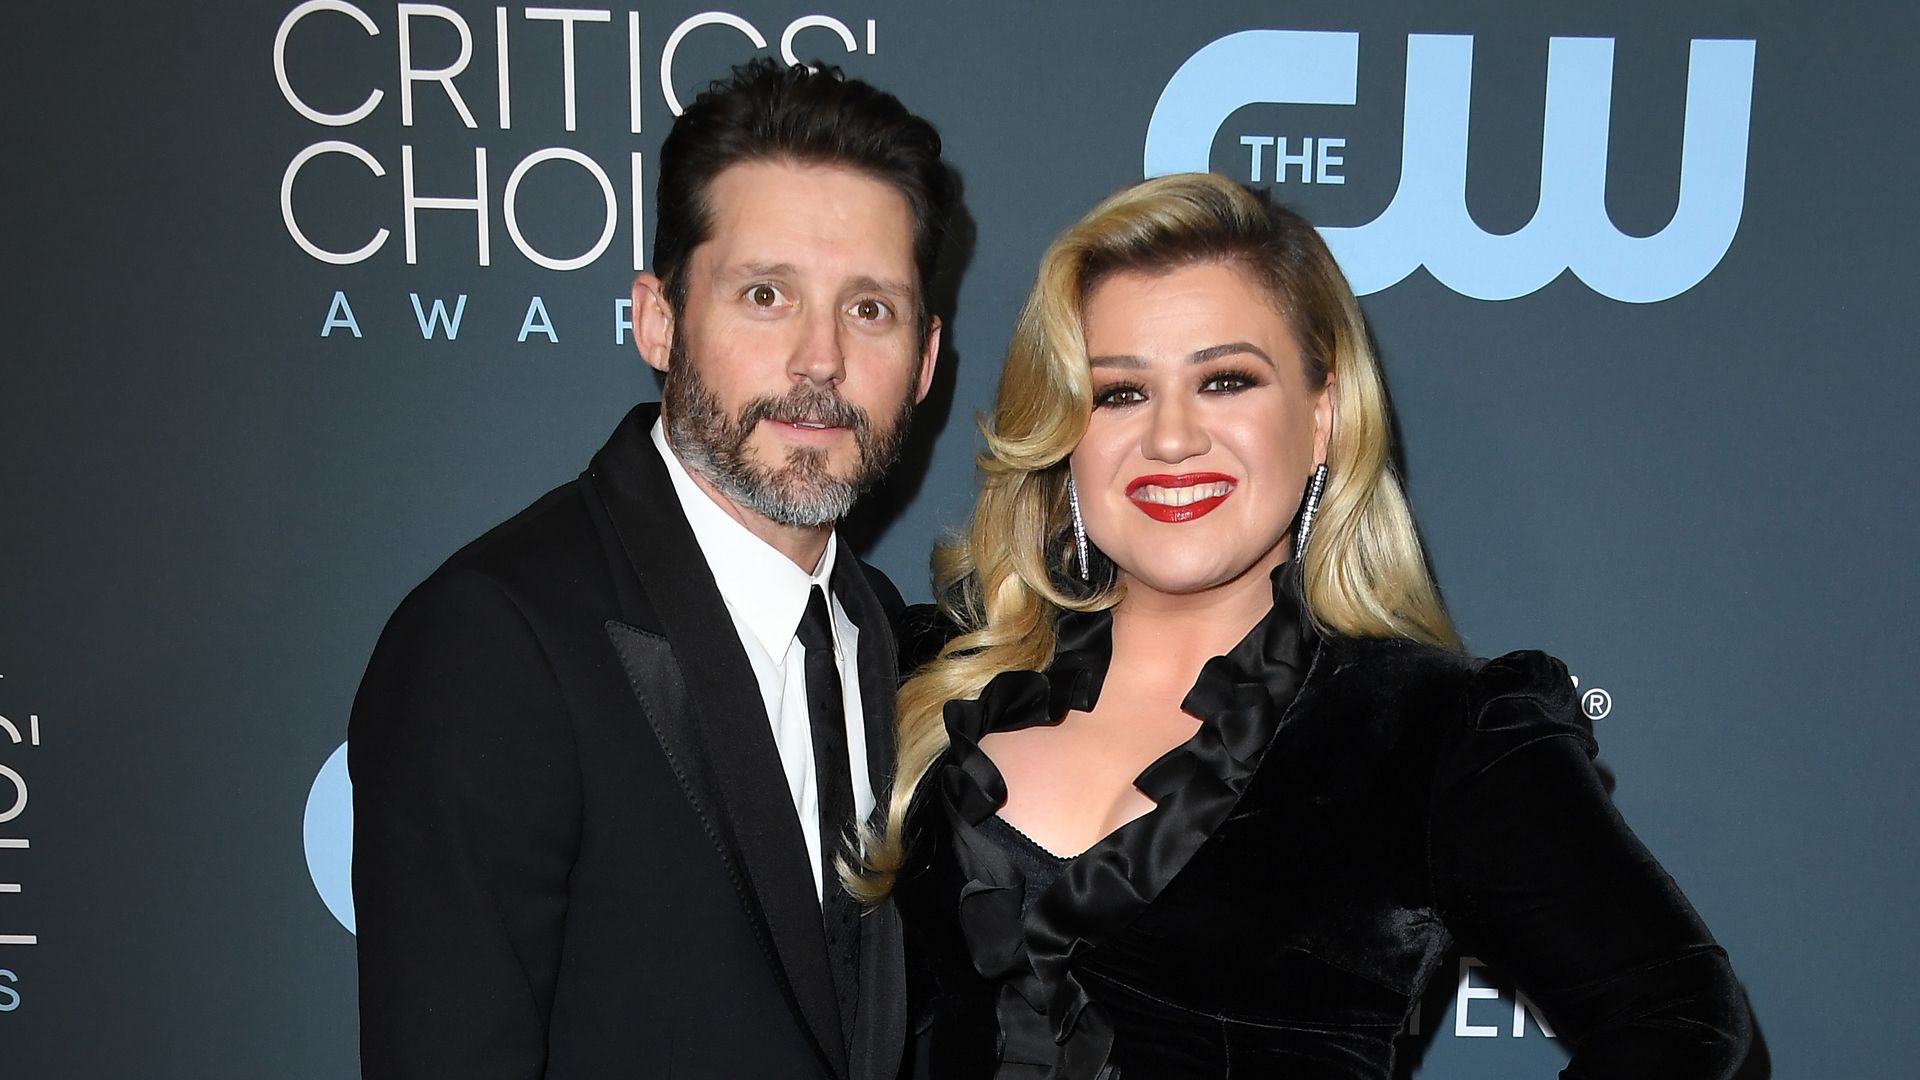 Kelly Clarkson recalls being a stepmom to teenagers during marriage to Brandon Blackstock: 'Real different'